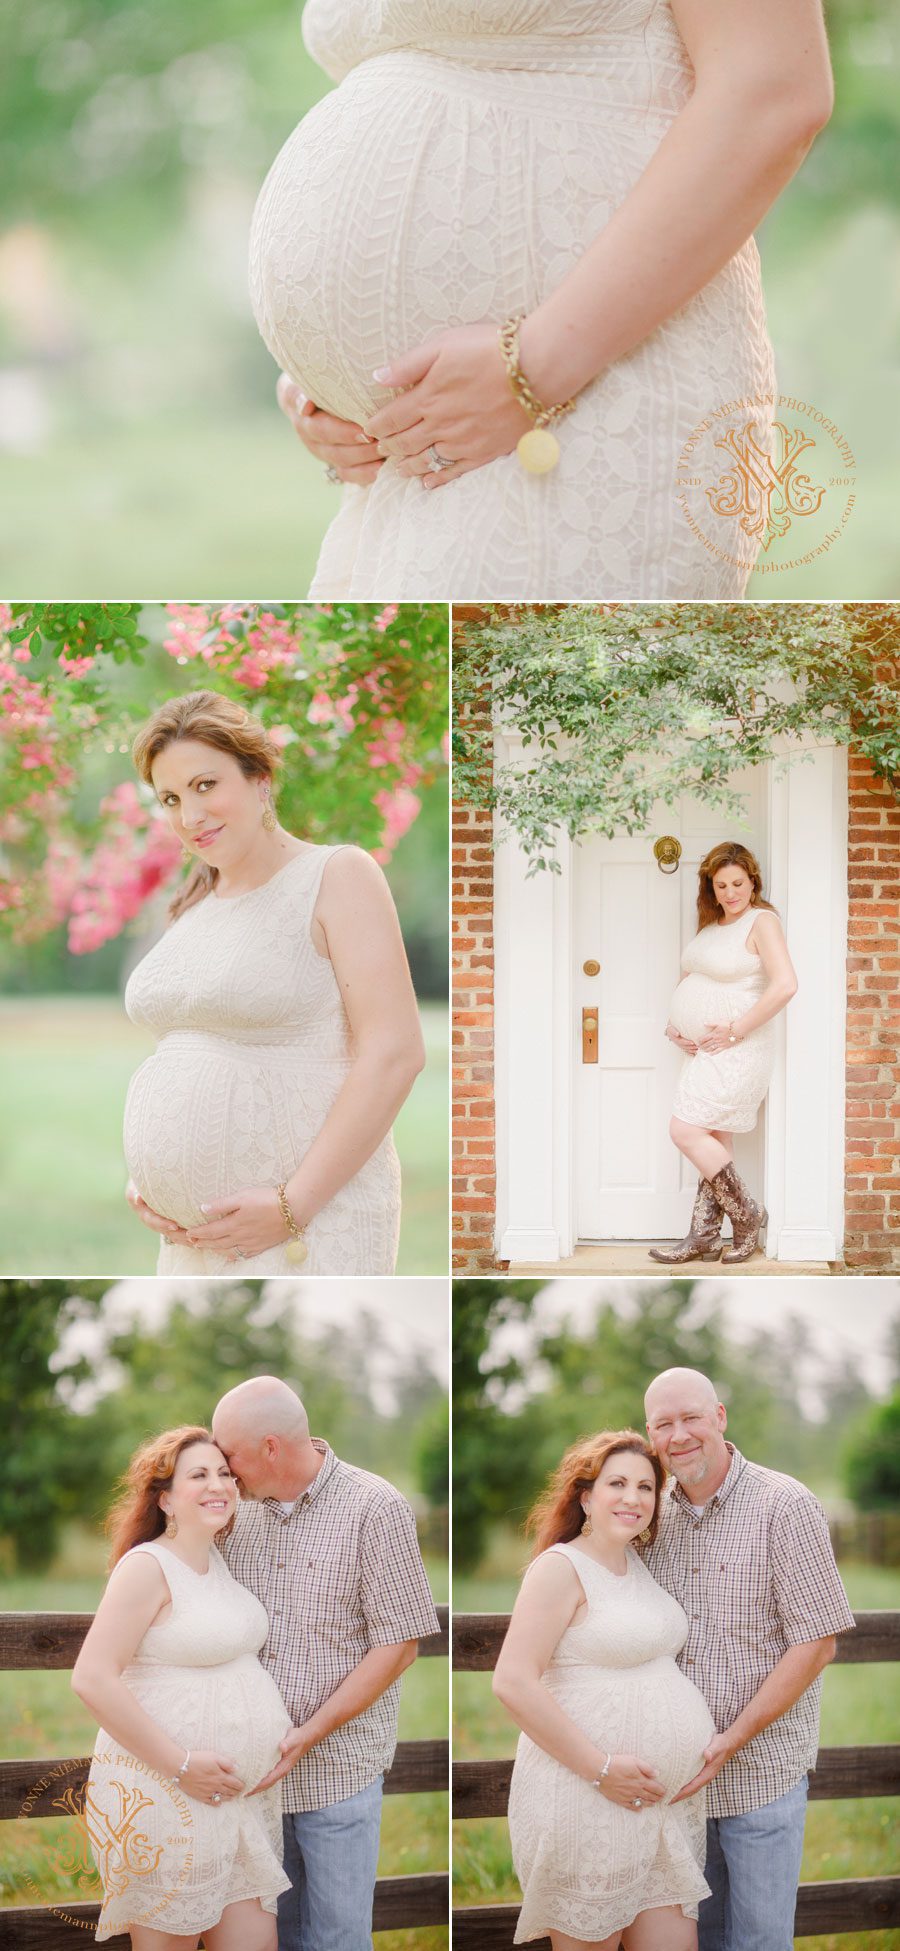 Summer portraits of pregnancy of a loving couple around the Athens, GA area.